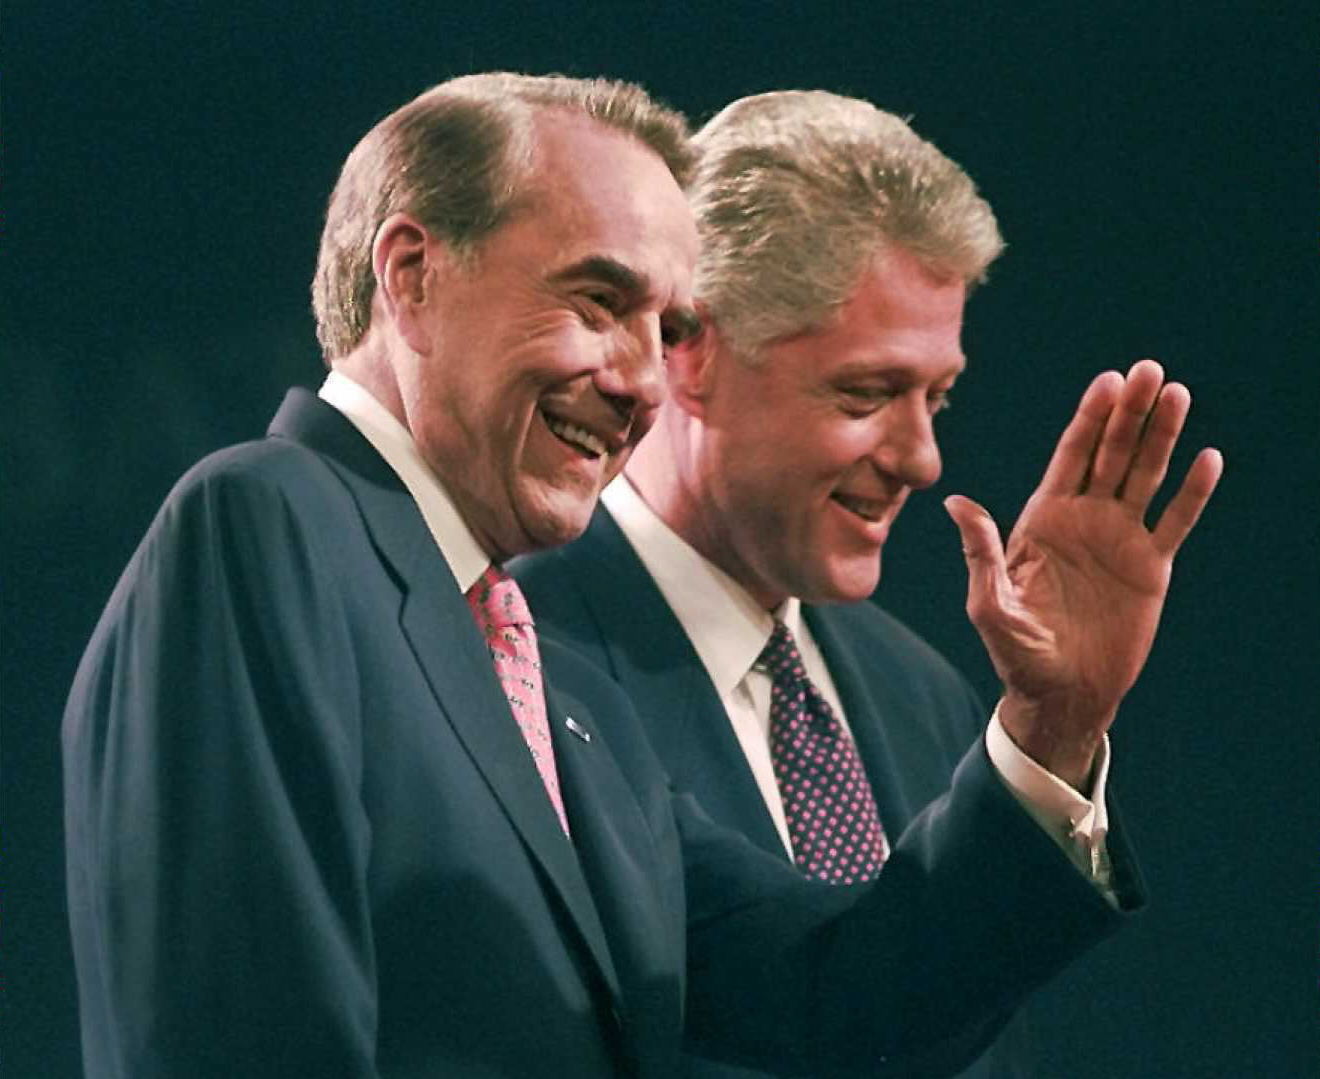 Republican challenger Bob Dole waves to the crowd along side of President Bill Clinton at the conclusion of their first debate in Hartford, Conn. in 1996 (Jon Levy—AFP/Getty Images)